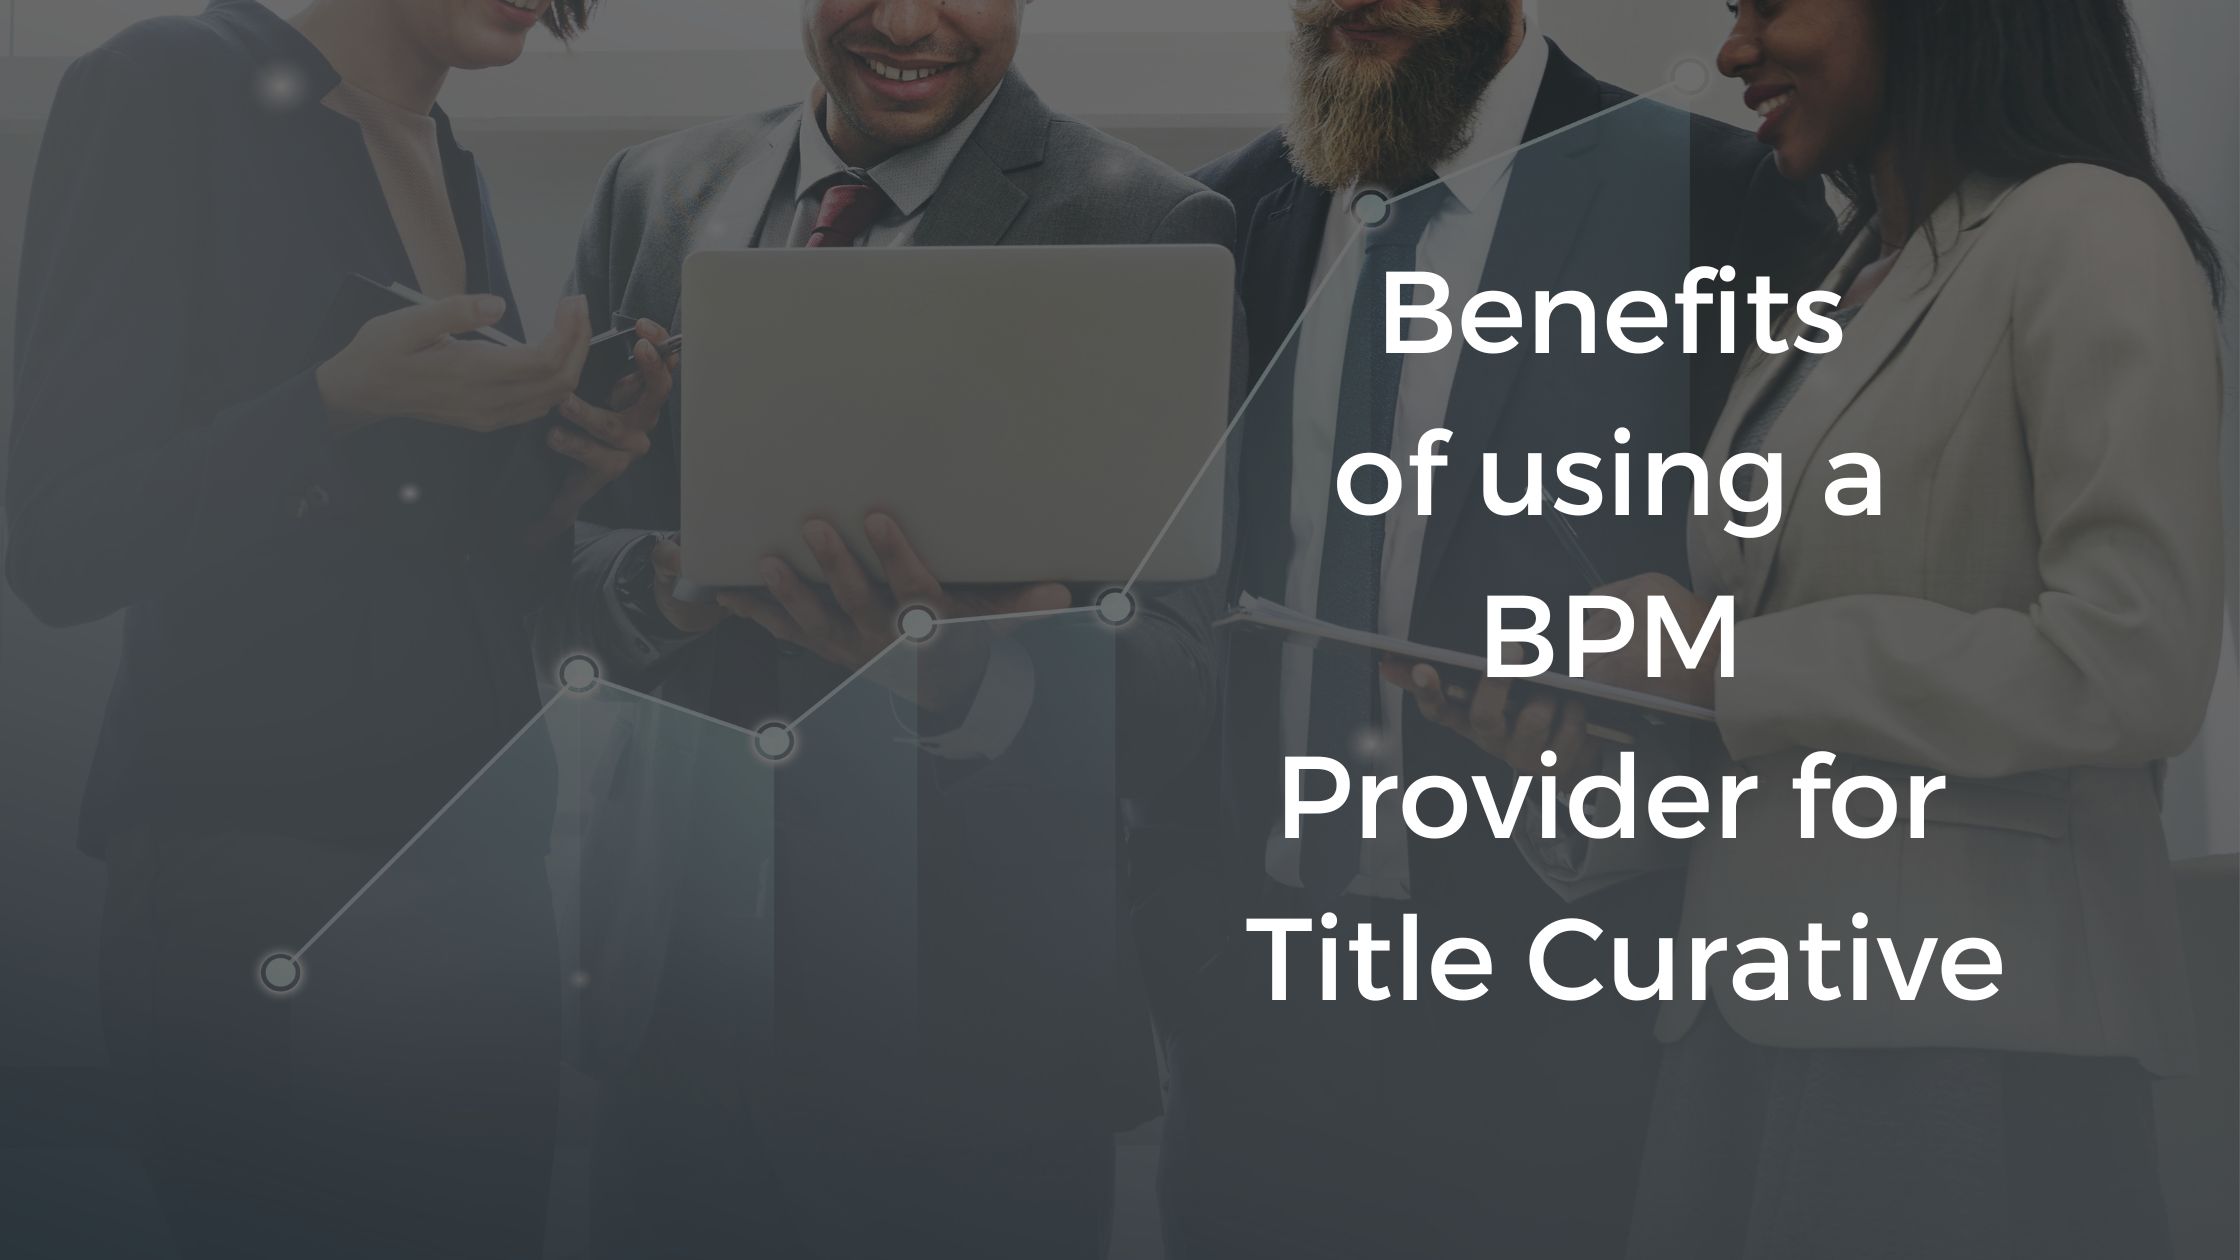 Benefits of Using a BPM Provider for Title Curative